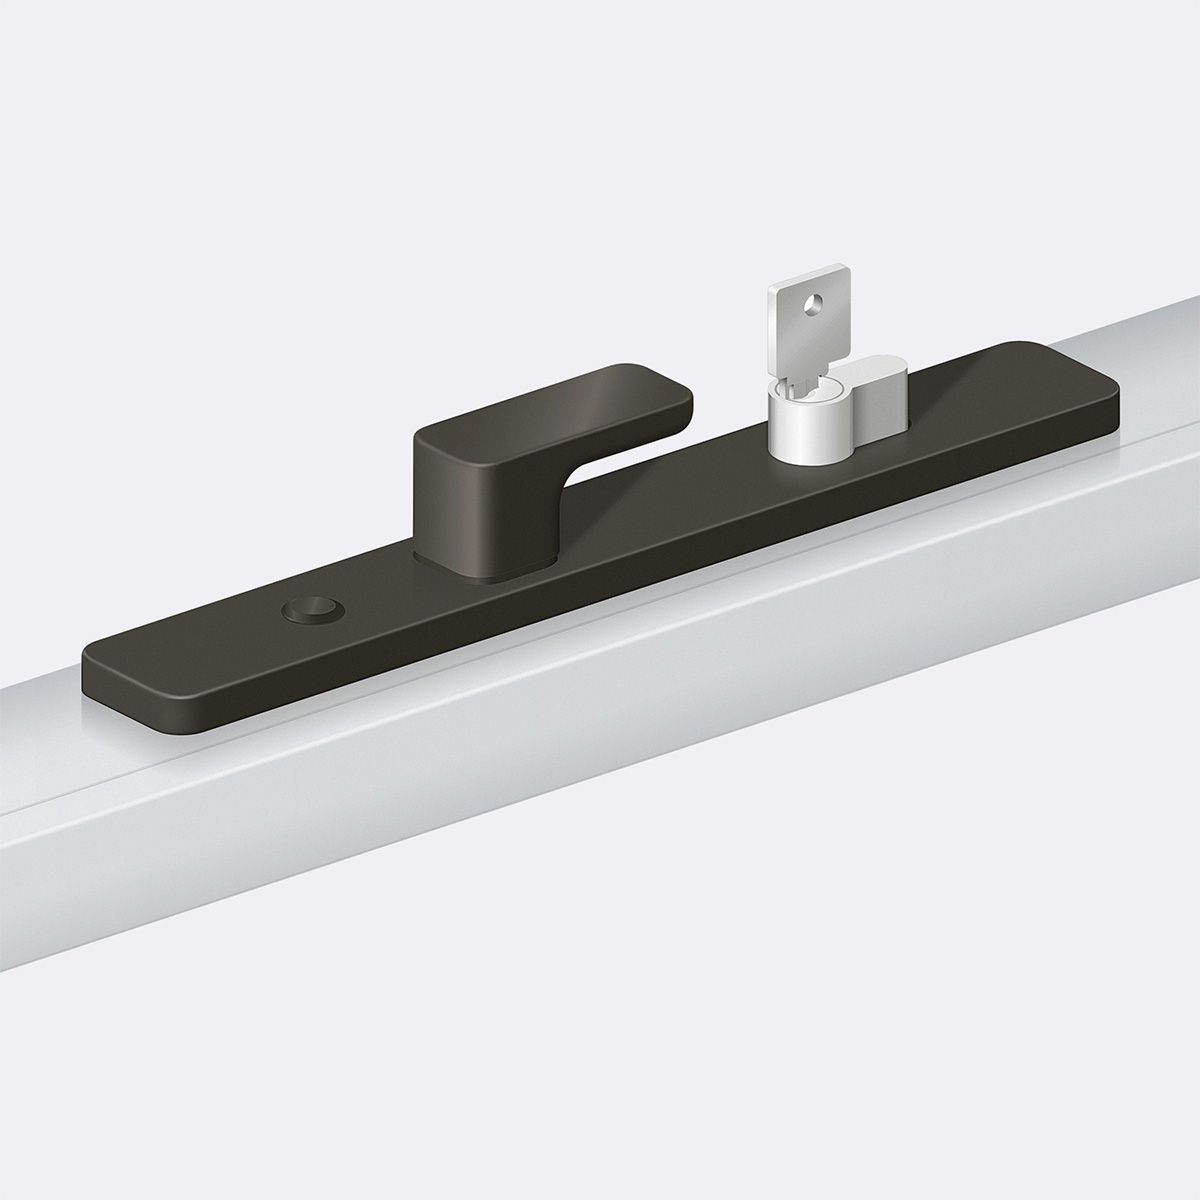 Gas Strut Awning Window lever handle